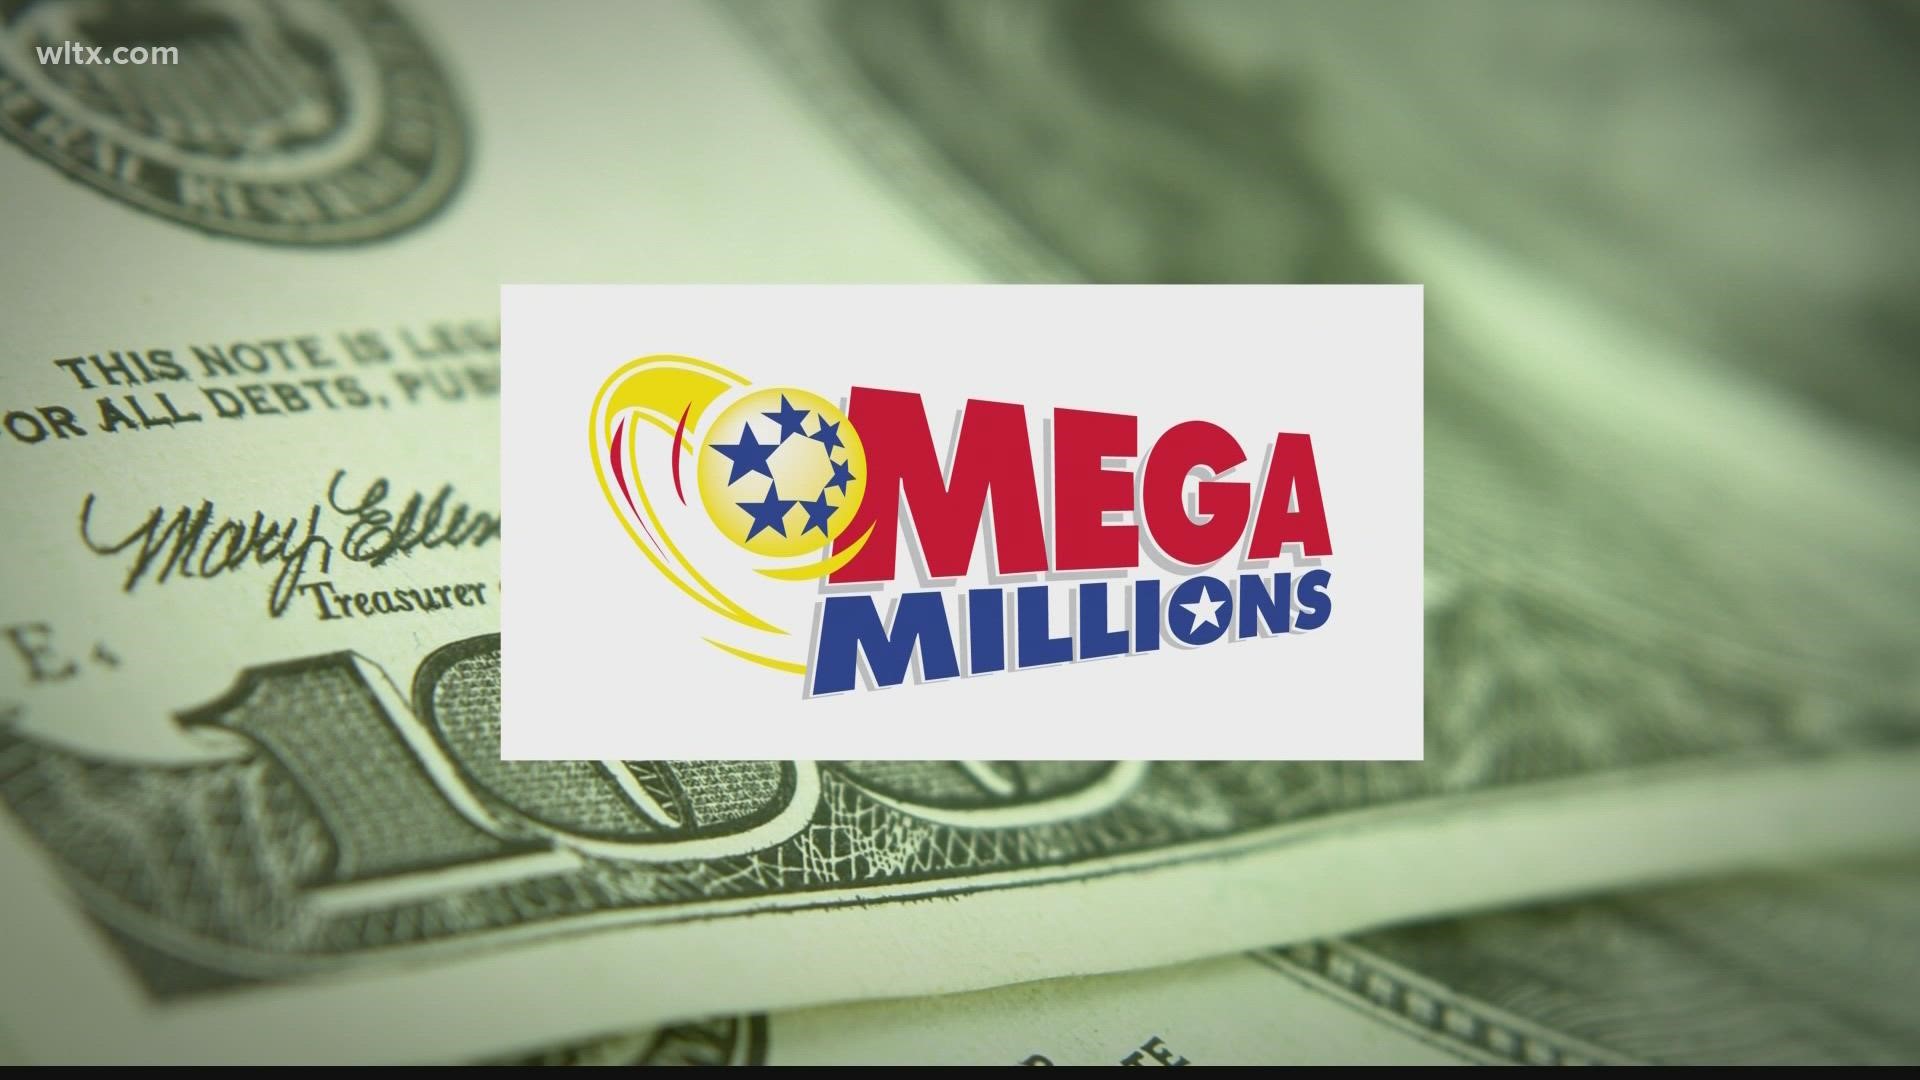 The jackpot has soared to $1.35 billion after nobody hit the $1.1 billion top prize in Tuesday night's drawing.